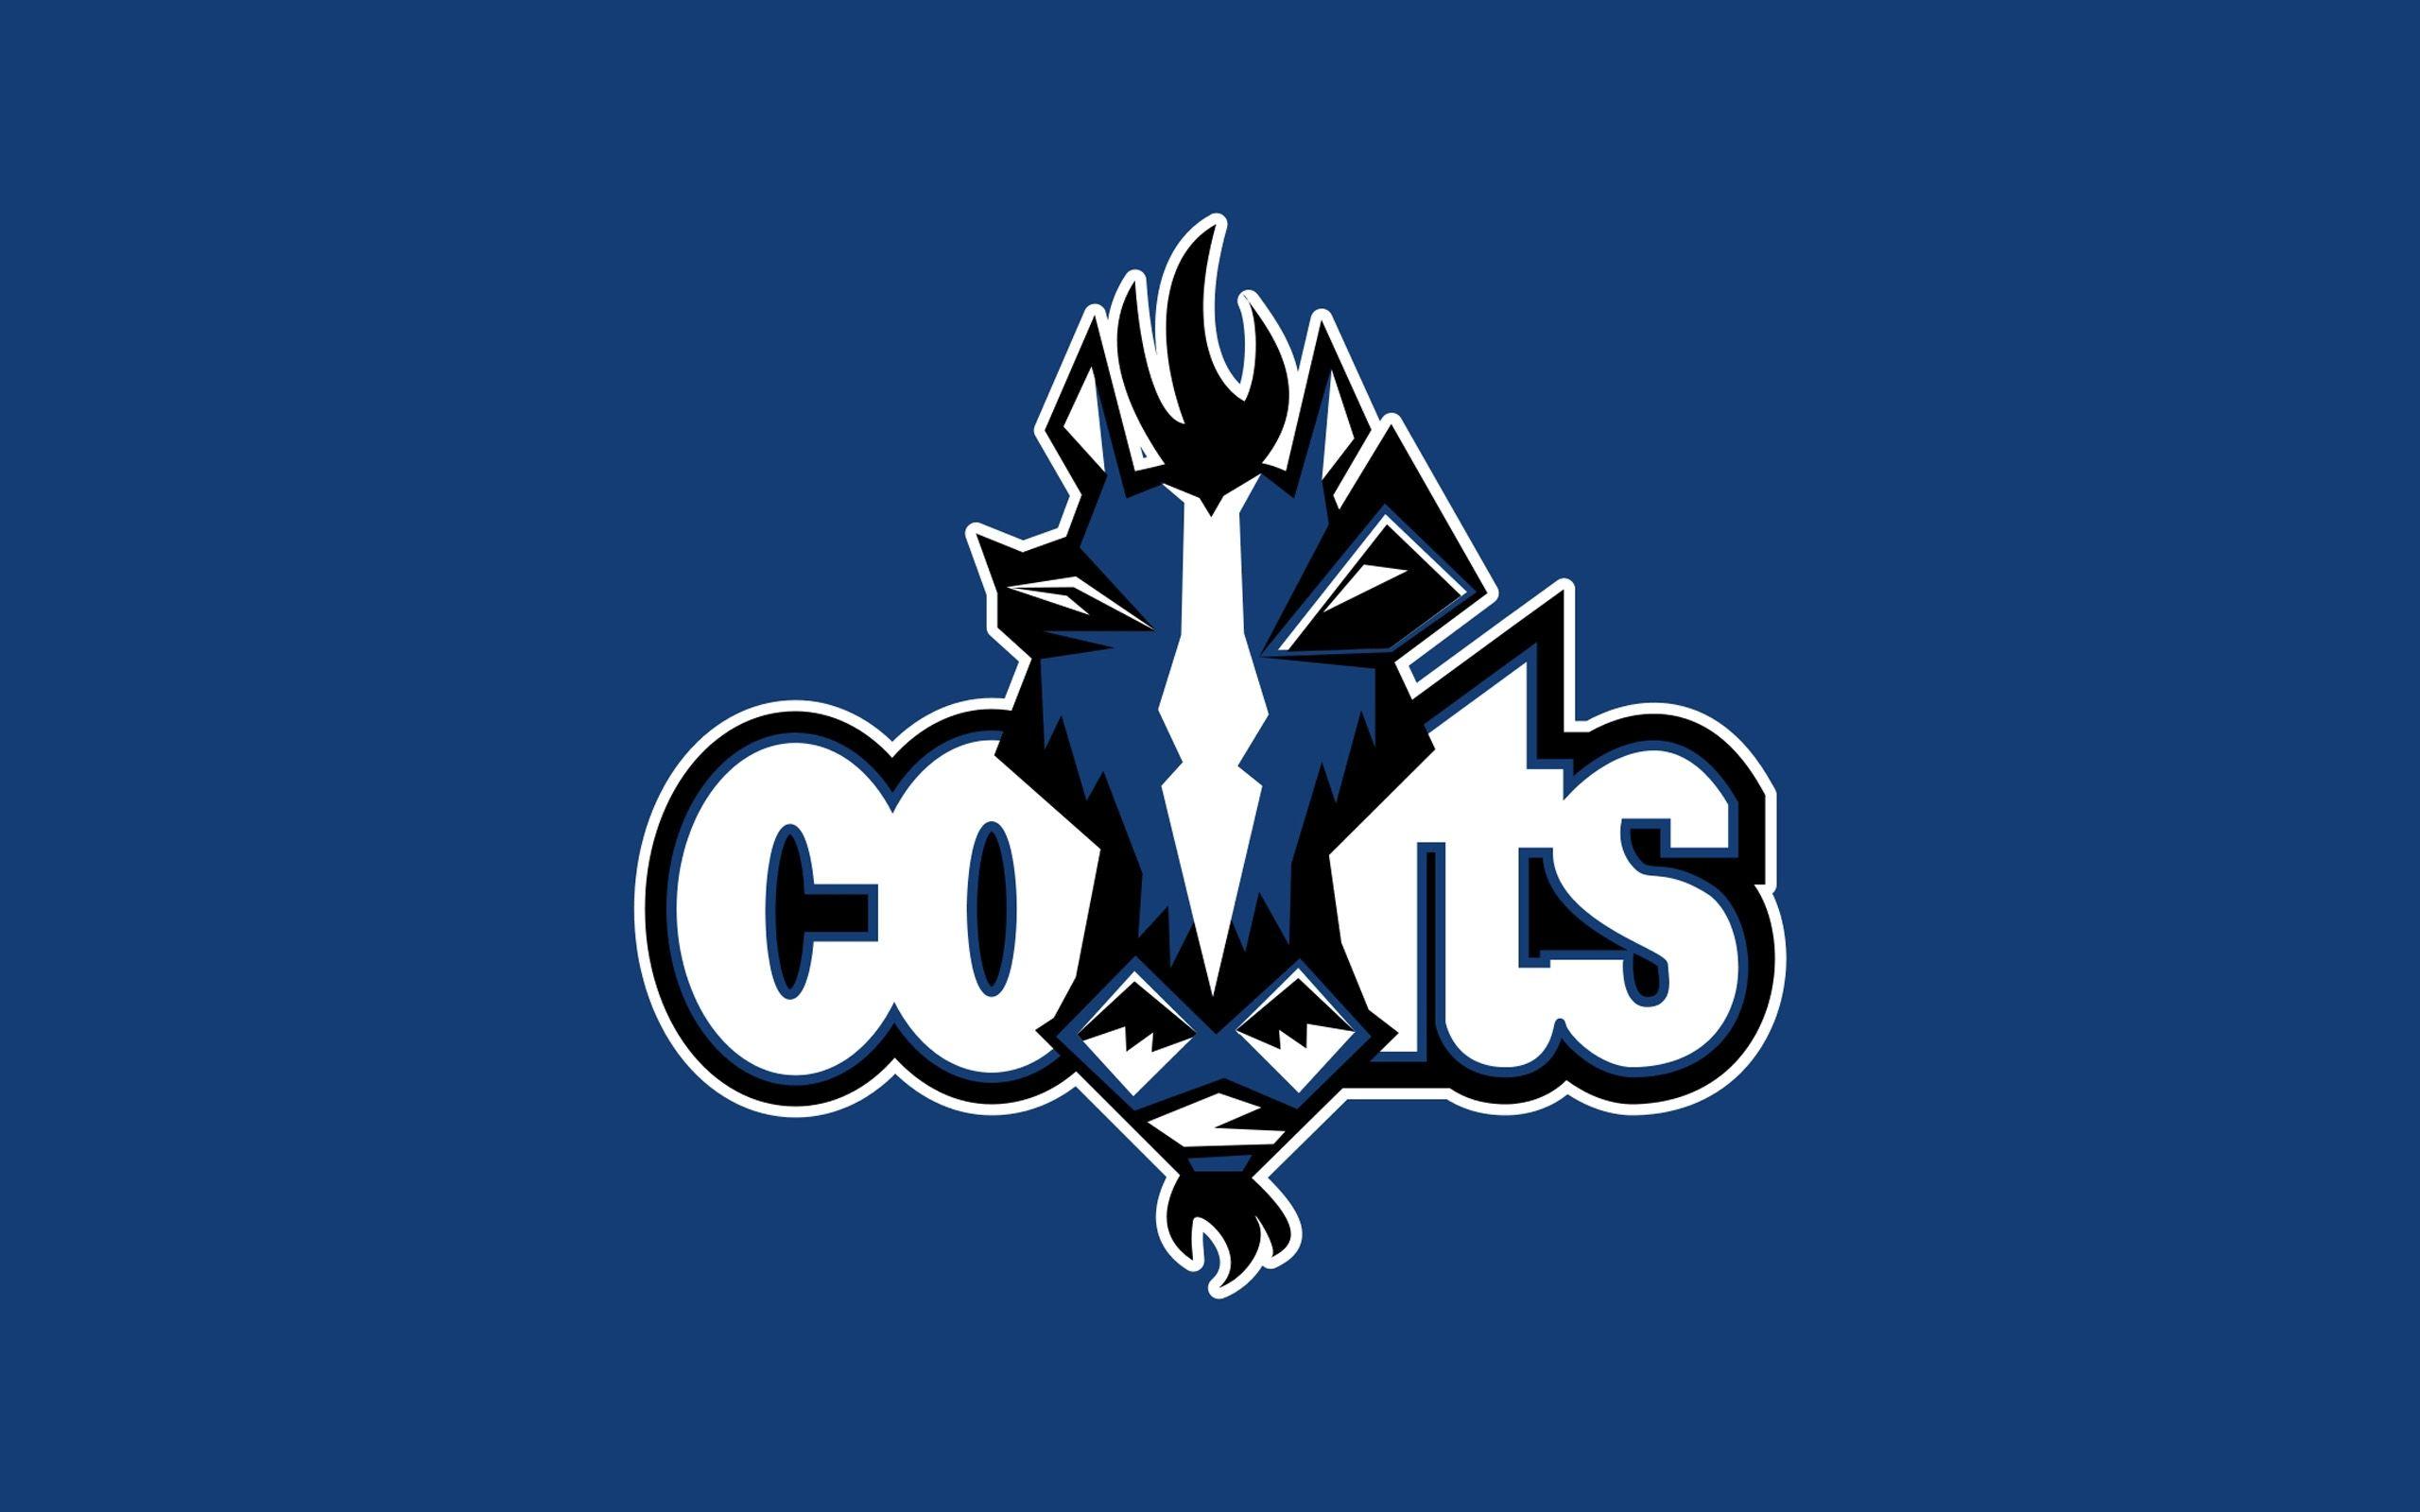 Colts Background Free Download. Wallpaper, Background, Image